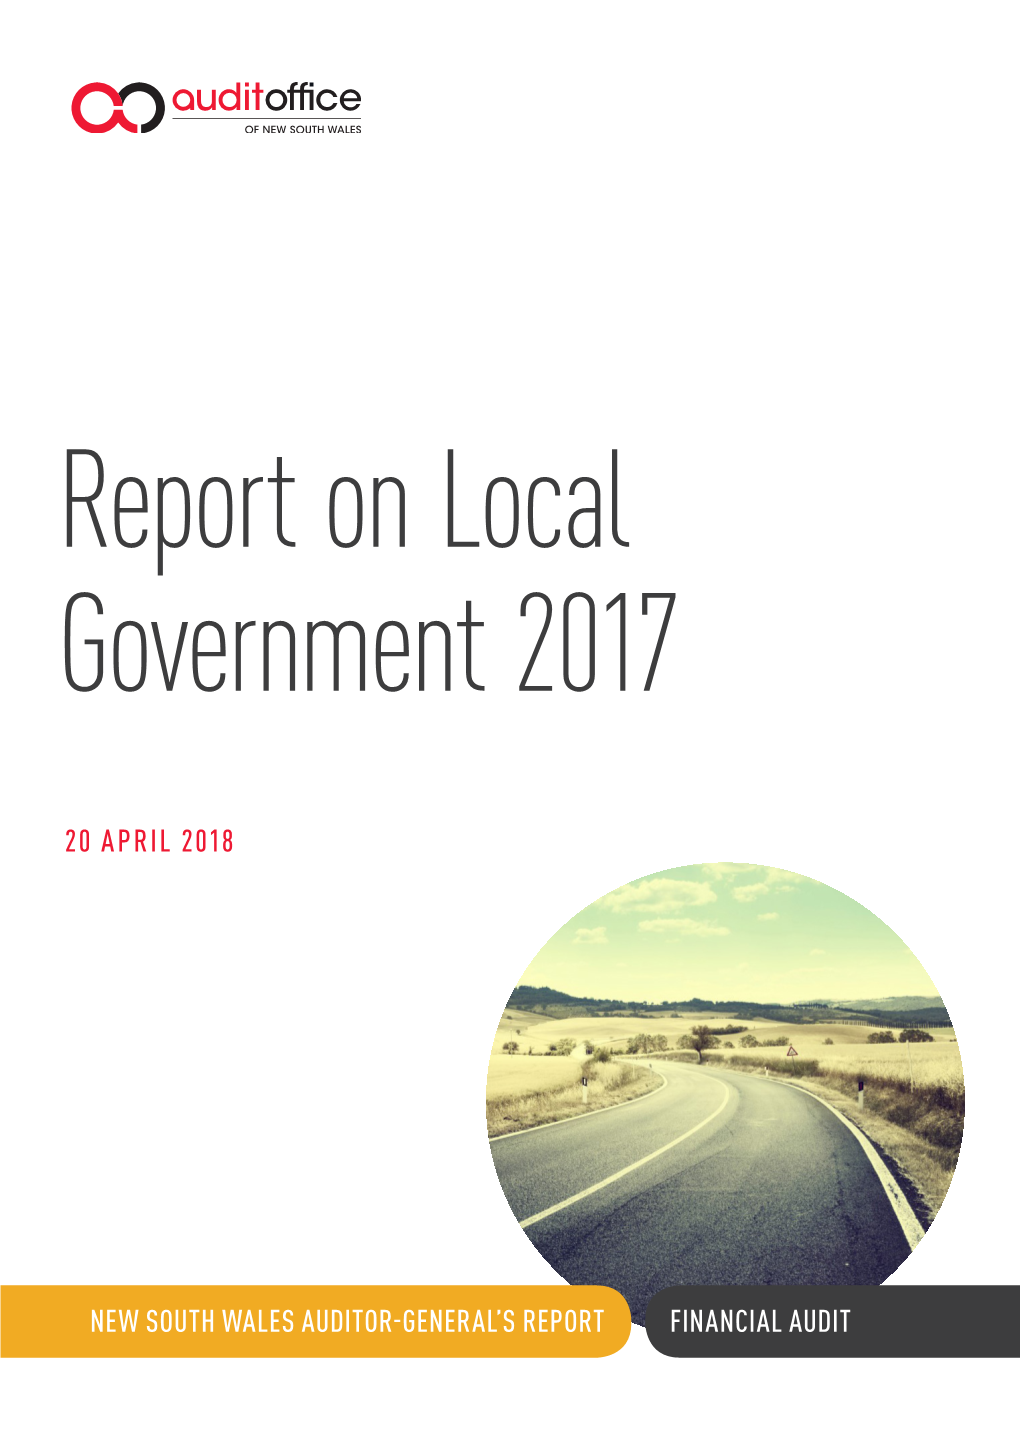 Report on Local Government 2017